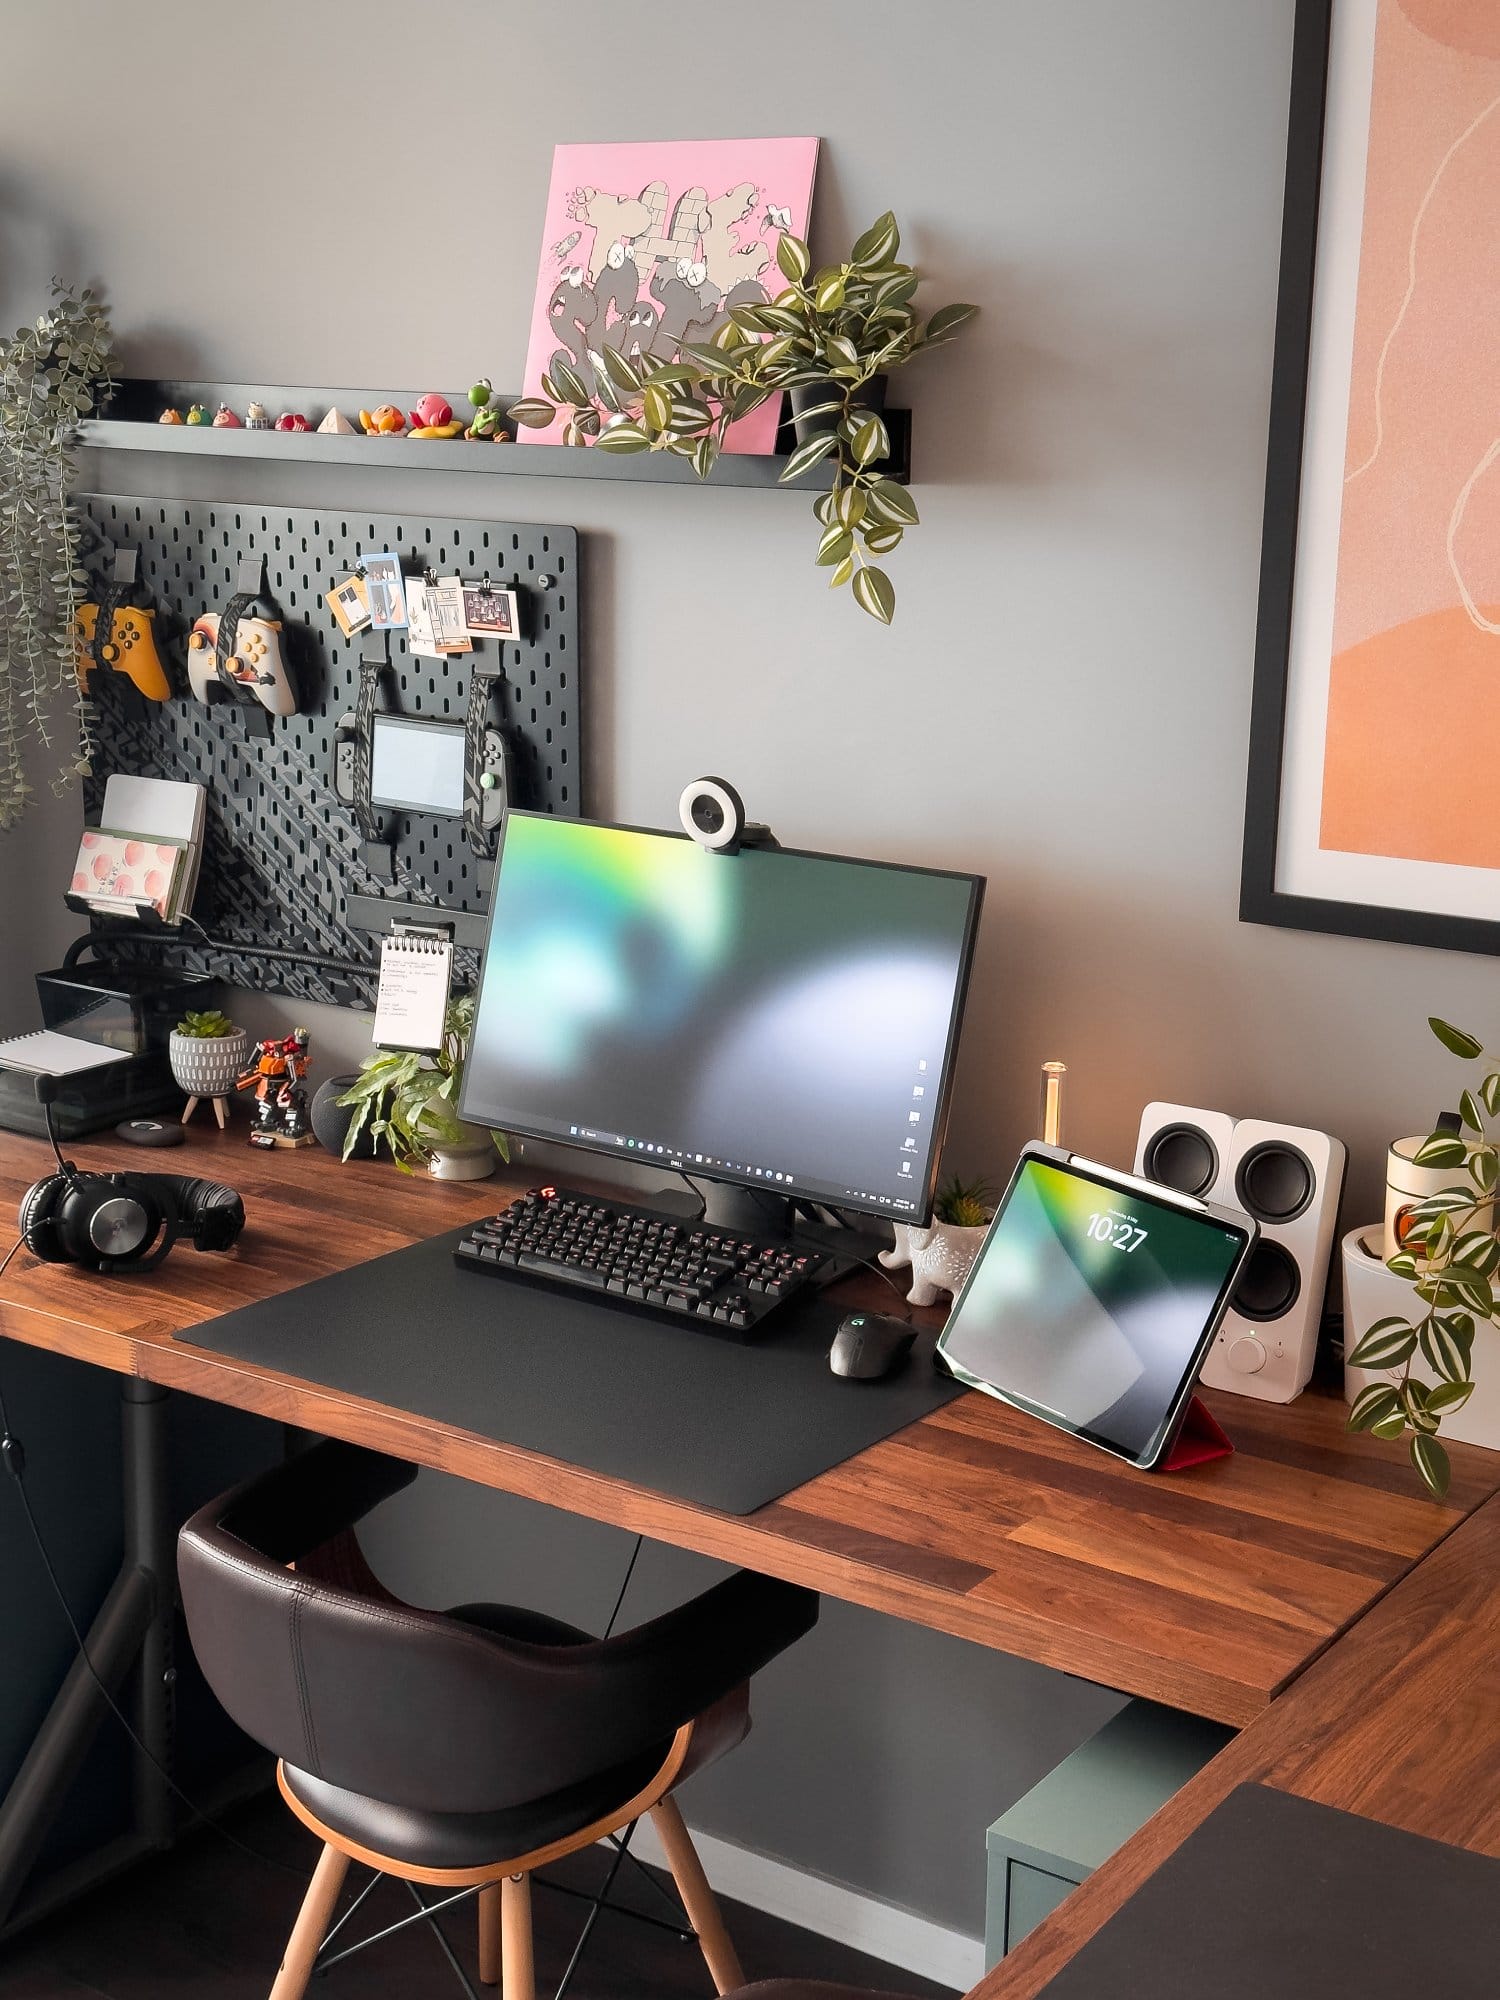  An L-shaped desk setup featuring a Dell monitor with a Razer Kiyo webcam, Logitech G Pro keyboard and mouse, an iPad Pro 12.9 (3rd Gen), Logitech G Pro X headphones, and various plants and decorative items on a wooden IKEA KARLBY desk with IKEA ALEX drawers and an IKEA UPPSPEL pegboard in the background